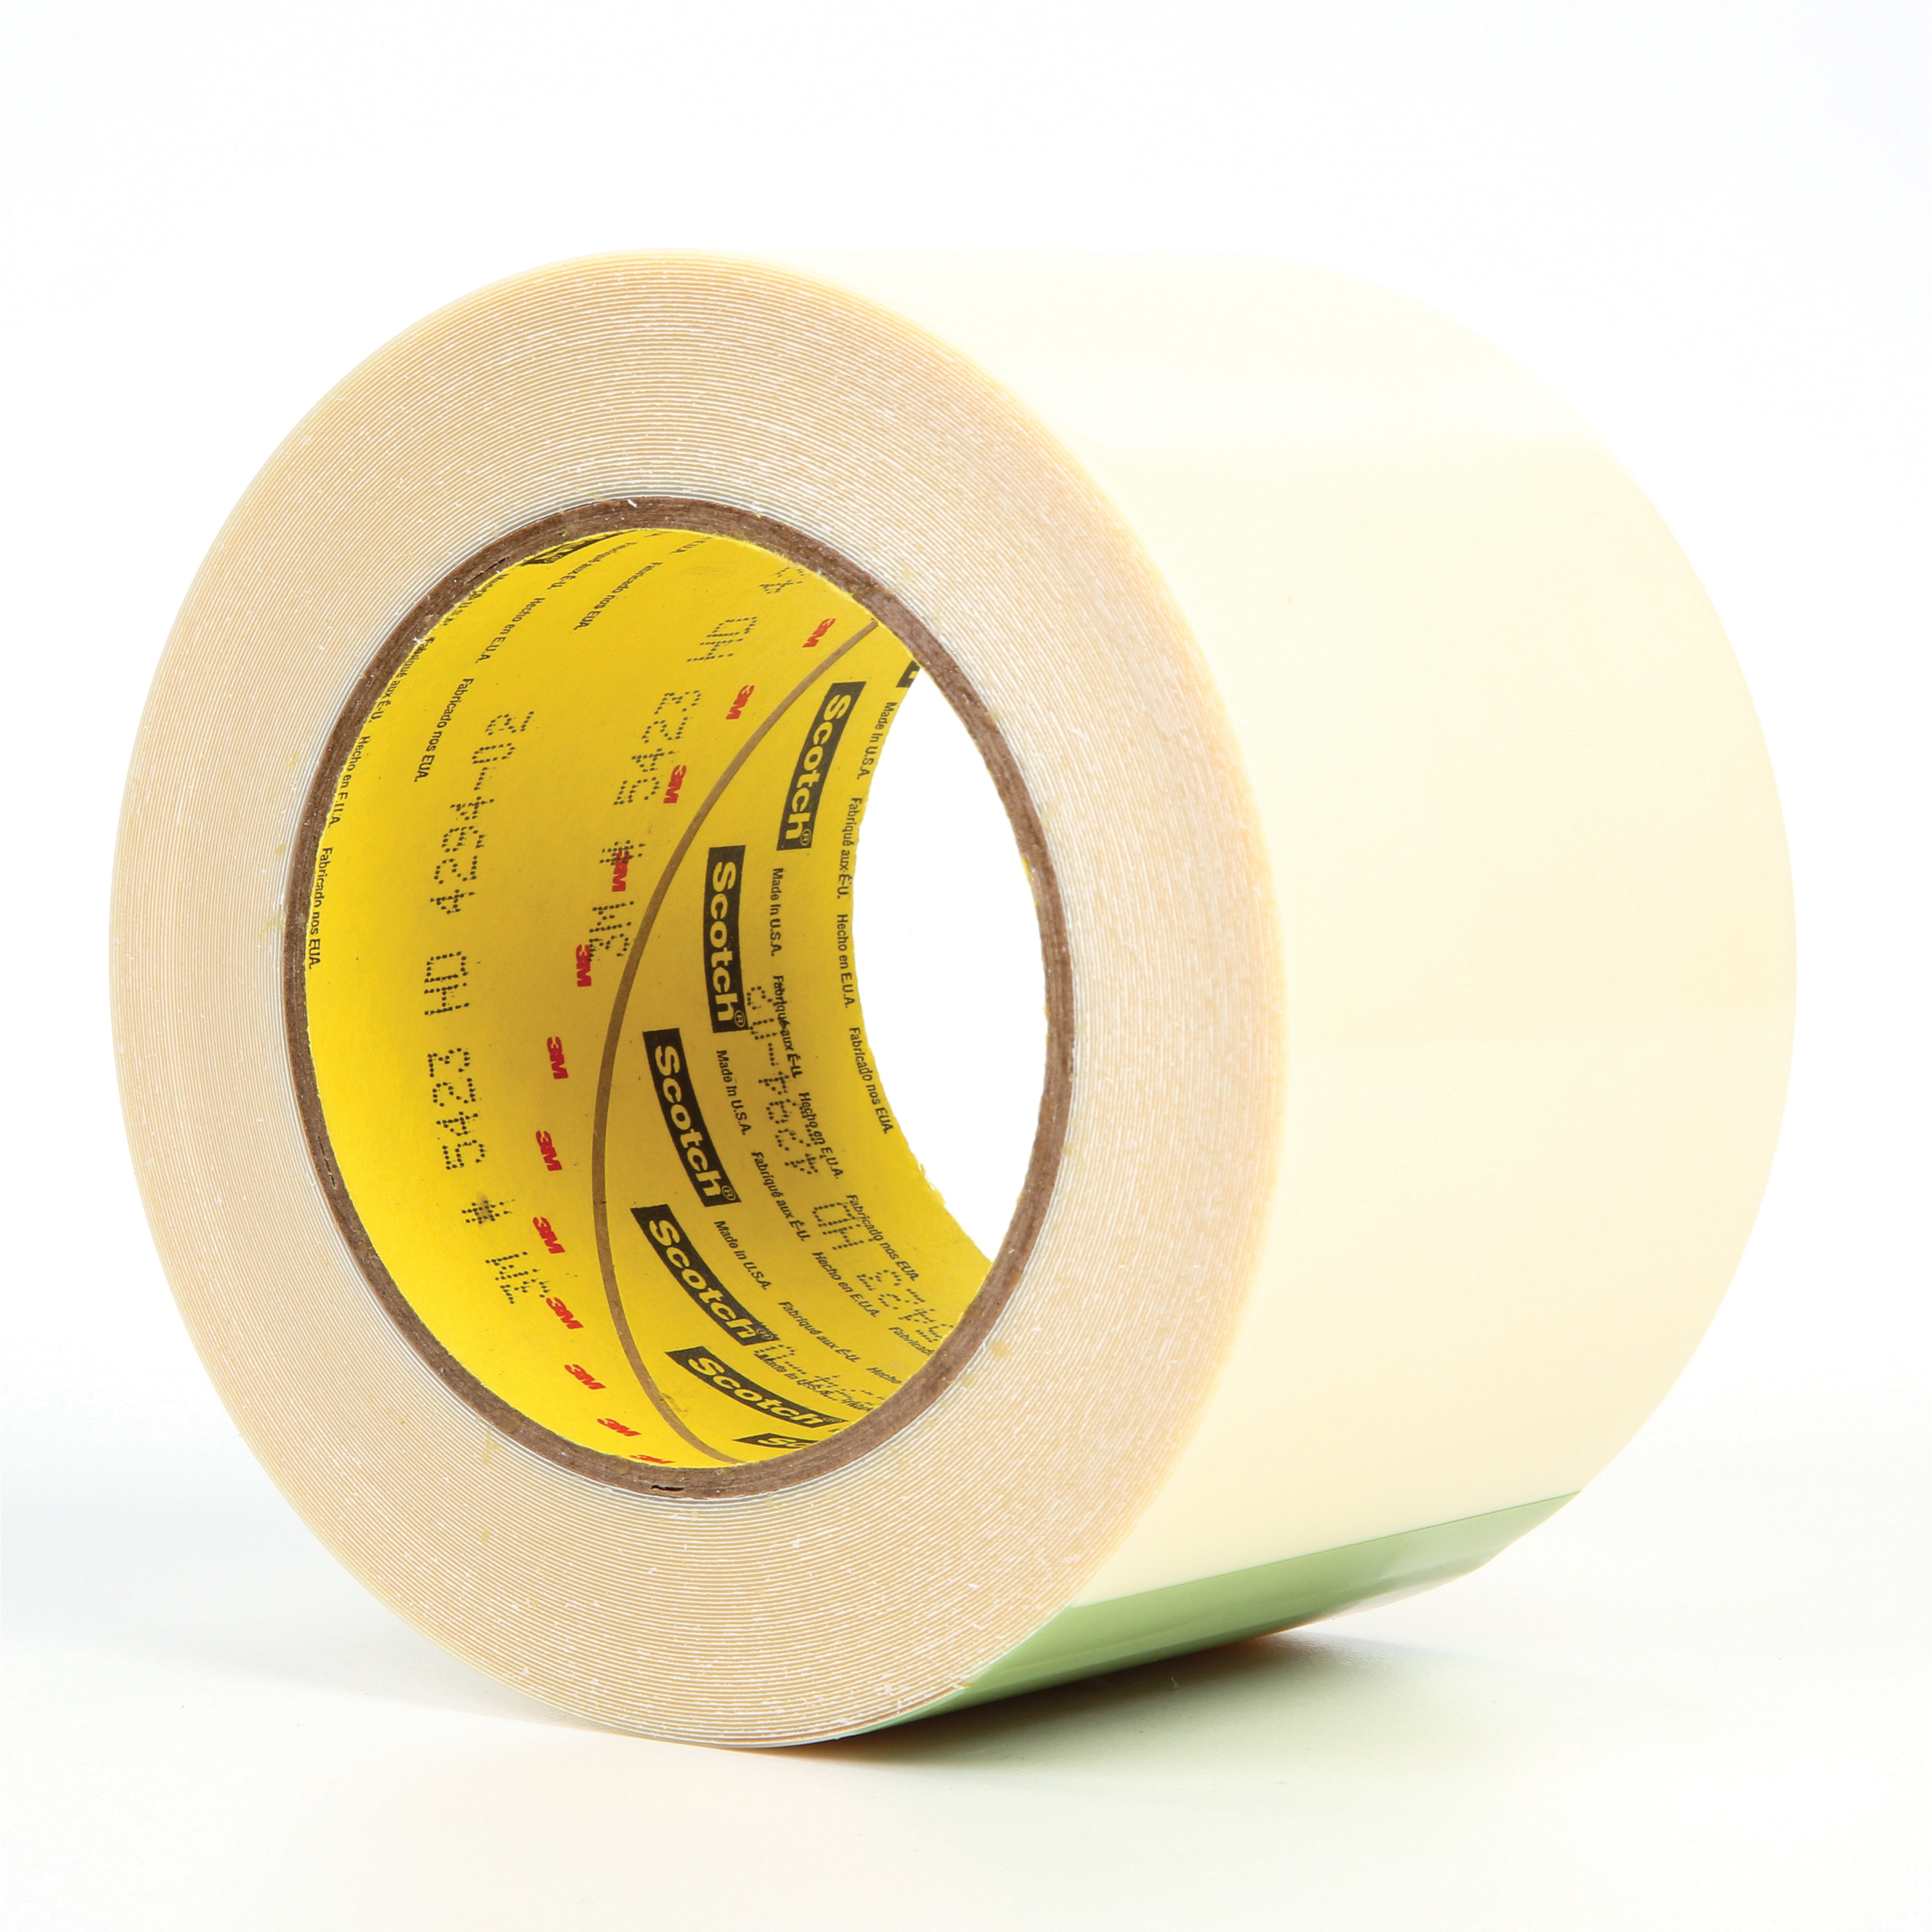 3M™ 021200-11992 Film Tape, 18 yd L x 3 in W, 11.7 mil THK, Rubber Adhesive, UHMWP Backing, Transparent